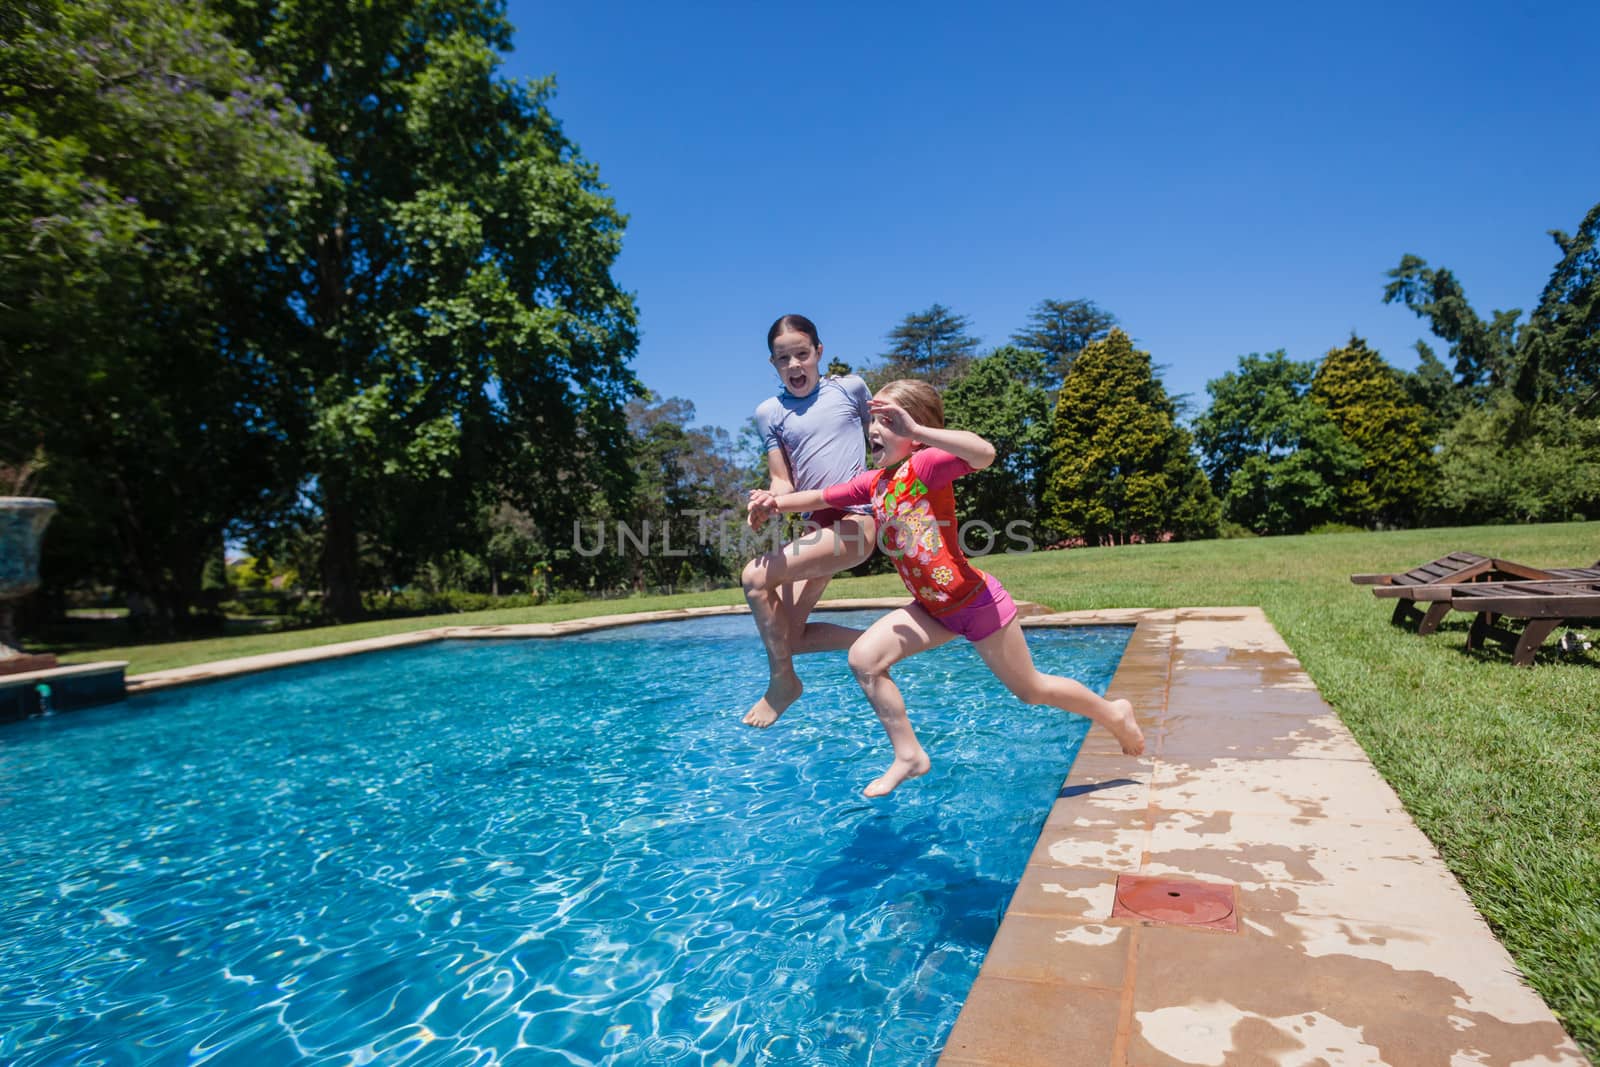 Young girls sisters having fun jumping into summer blue swimming pool.